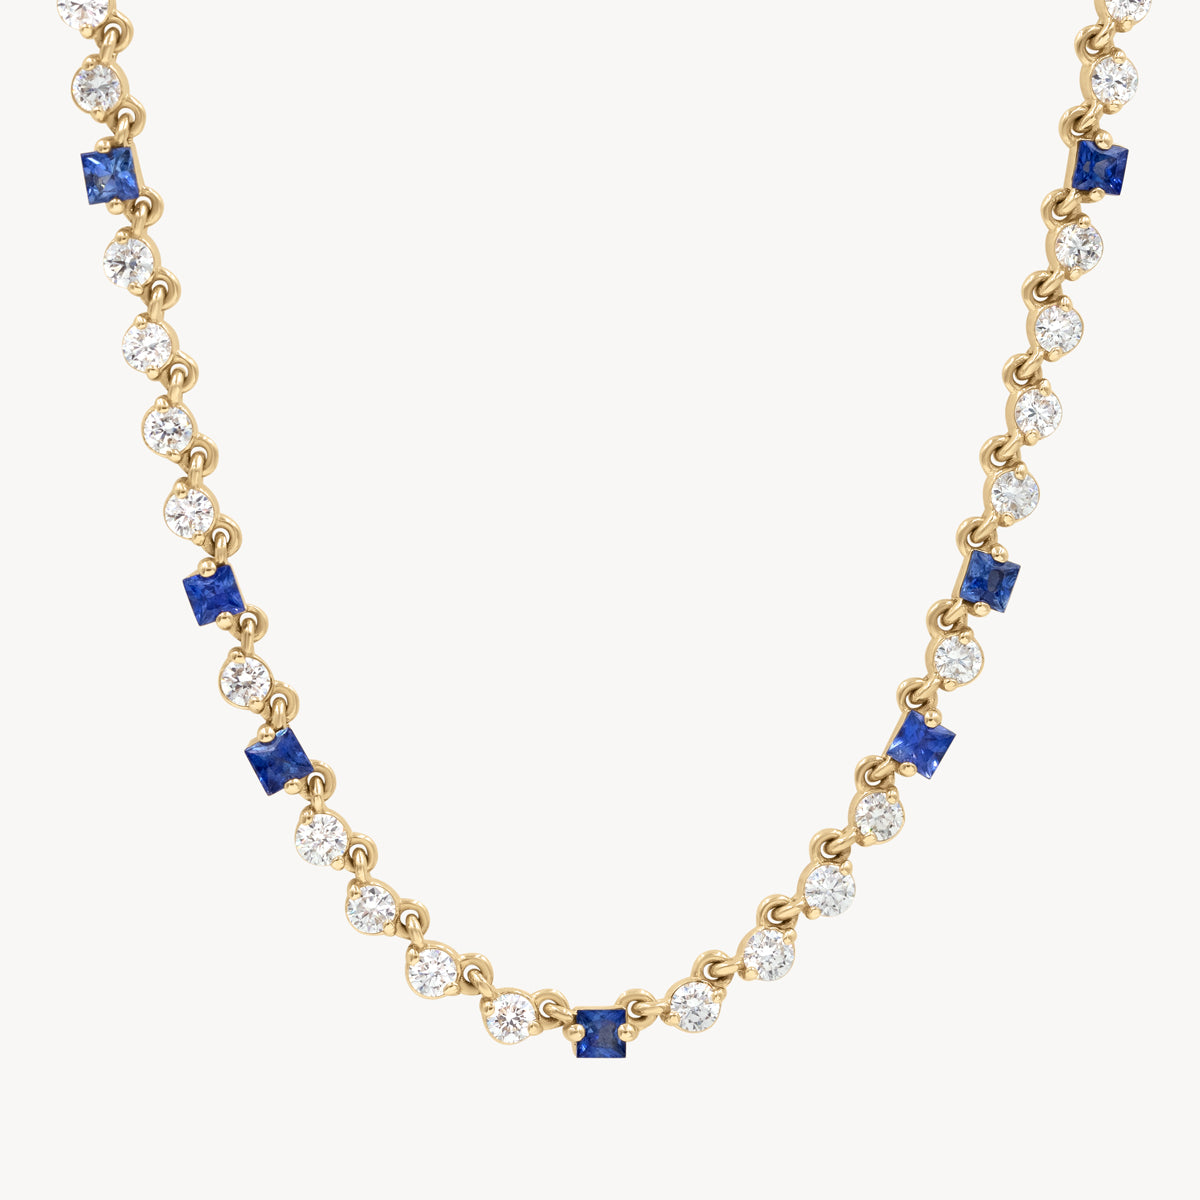 Wrapped in Sapphires and Diamonds Necklace